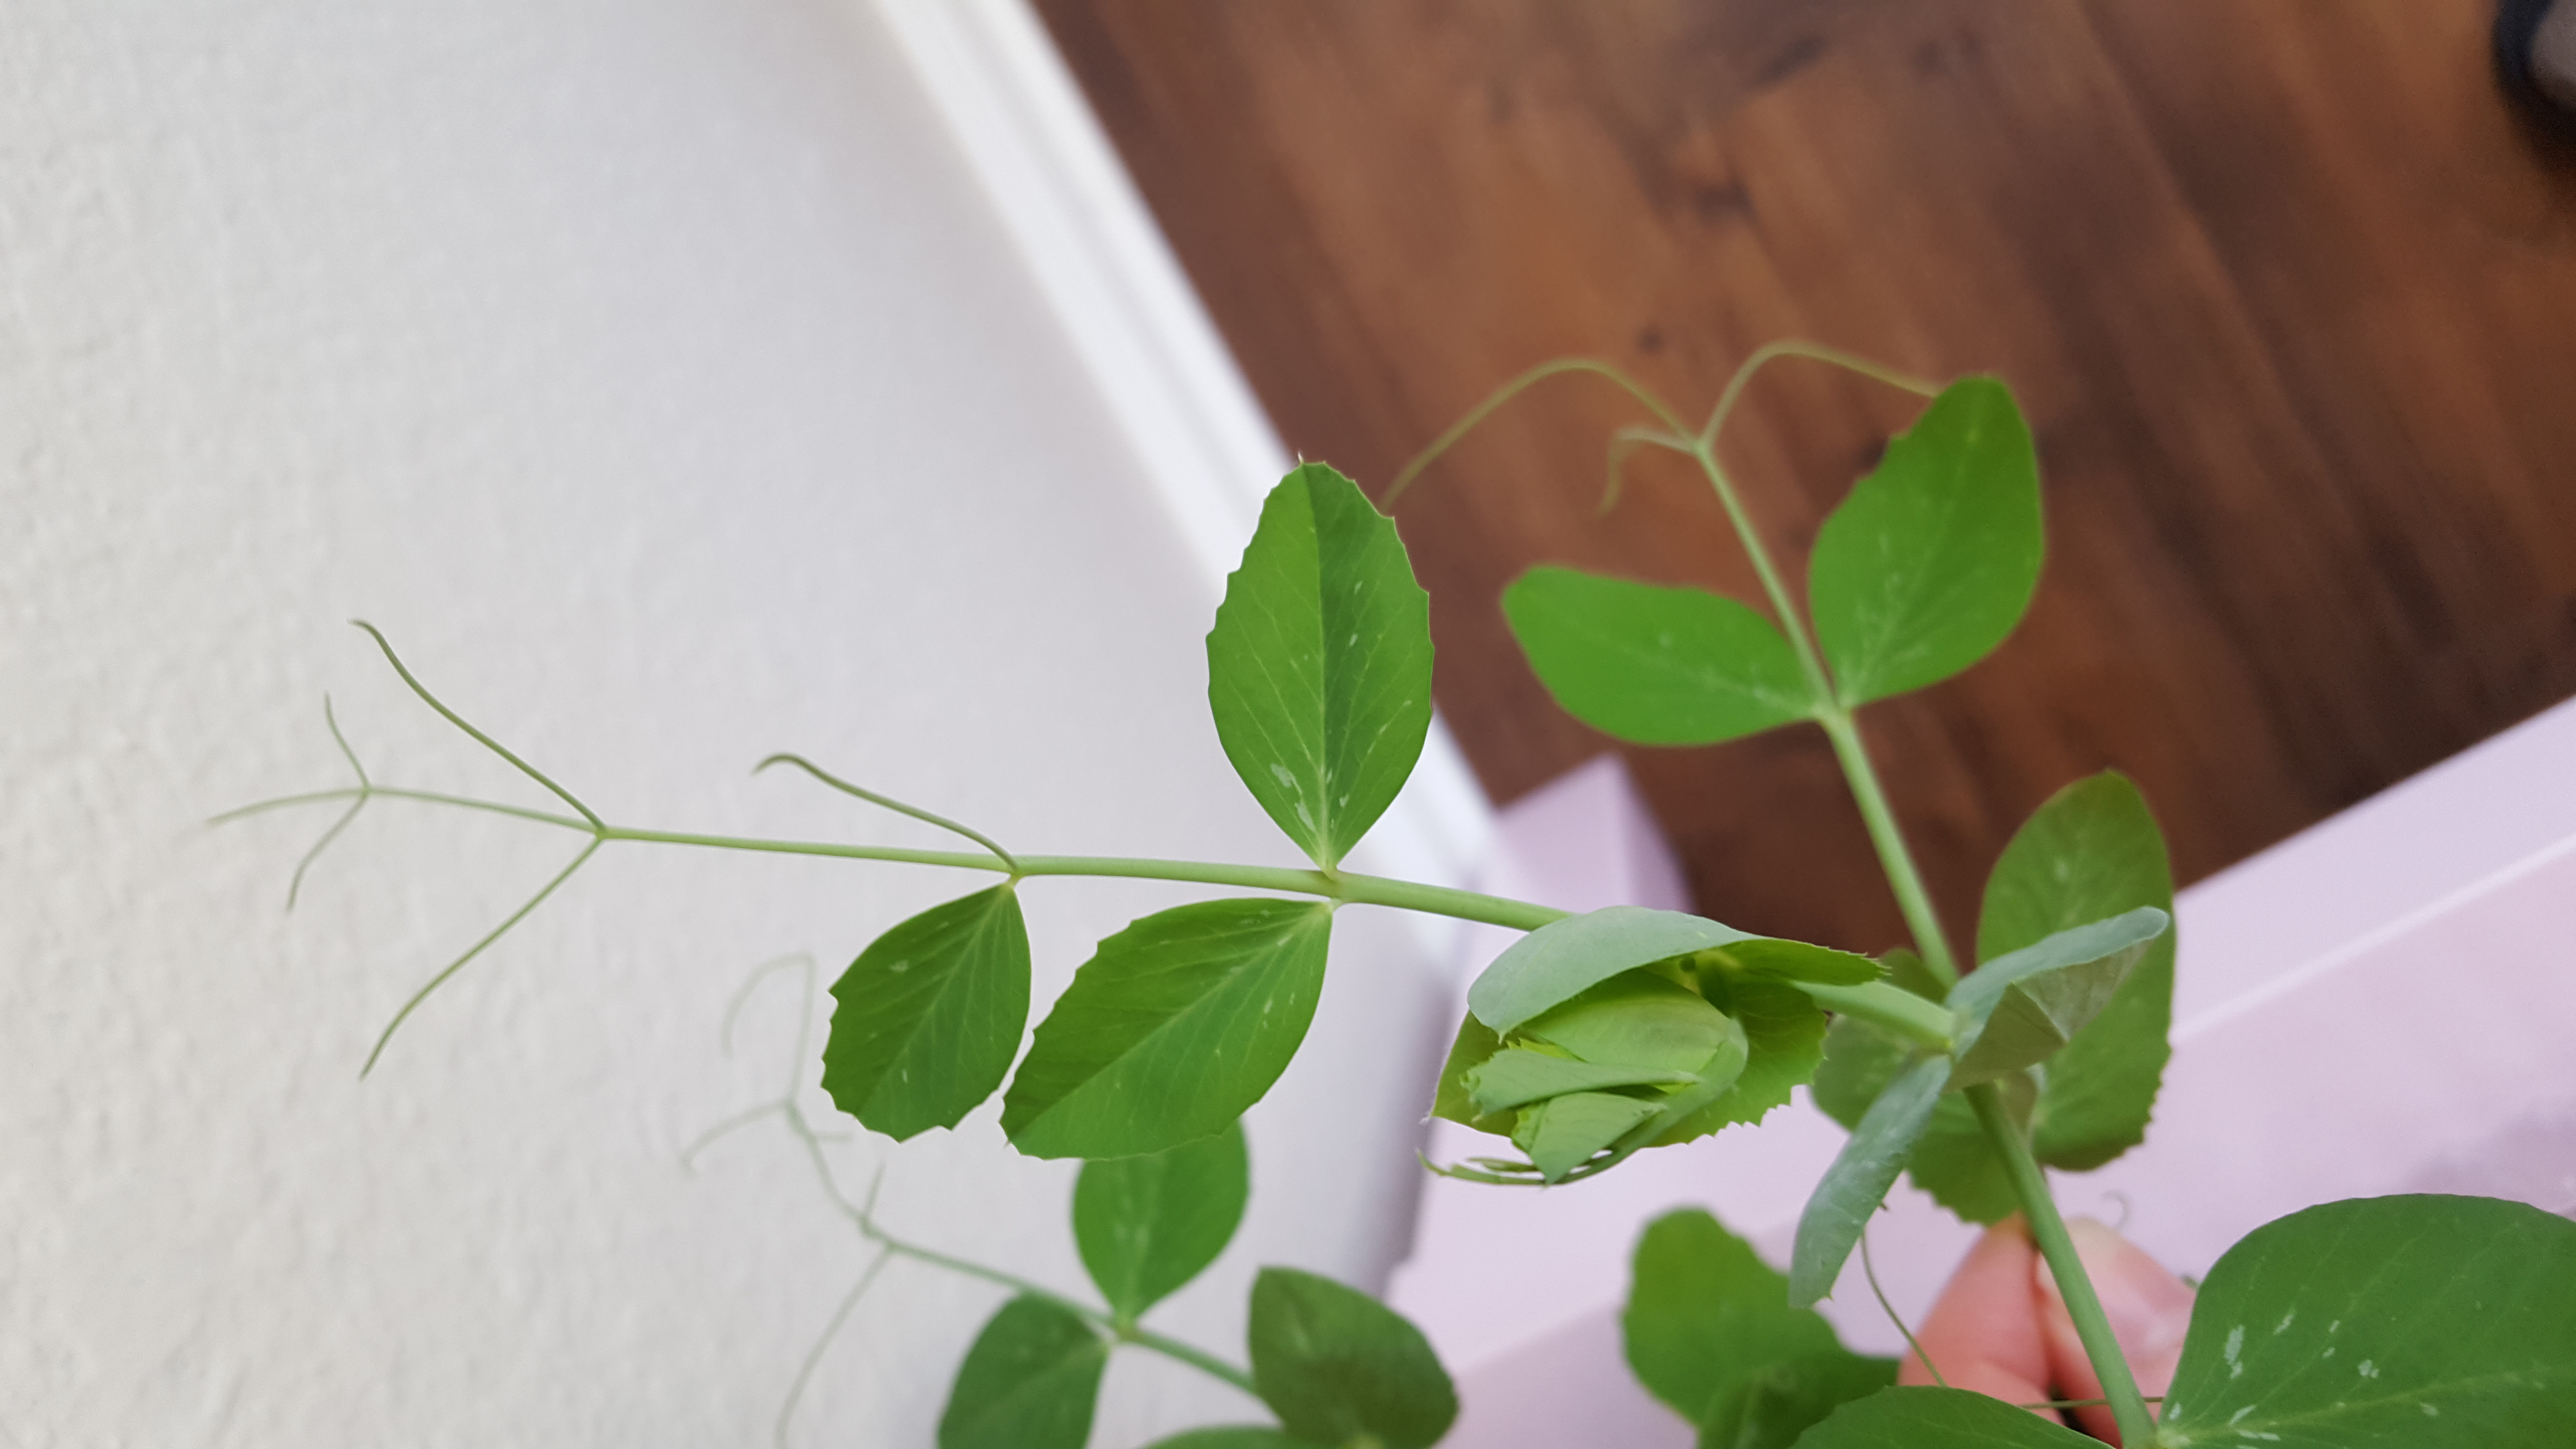 Pinnately compound leaves of a pea plant. A few of the leaflets at the end are narrow and coiling, functioning as tendrils.